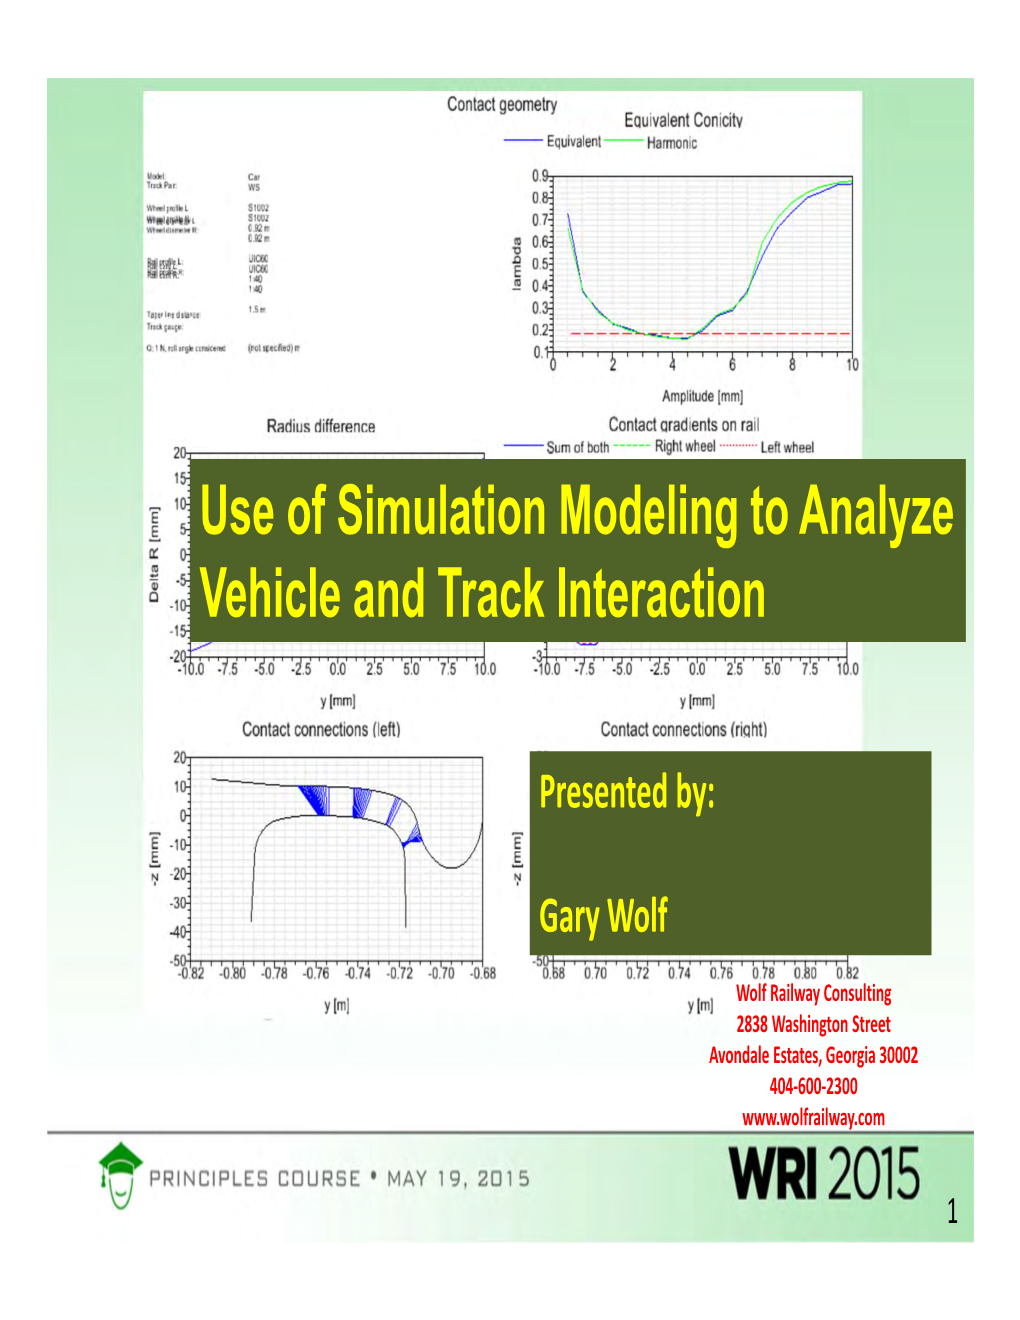 Use of Simulation Modeling to Analyze Vehicle and Track Interaction